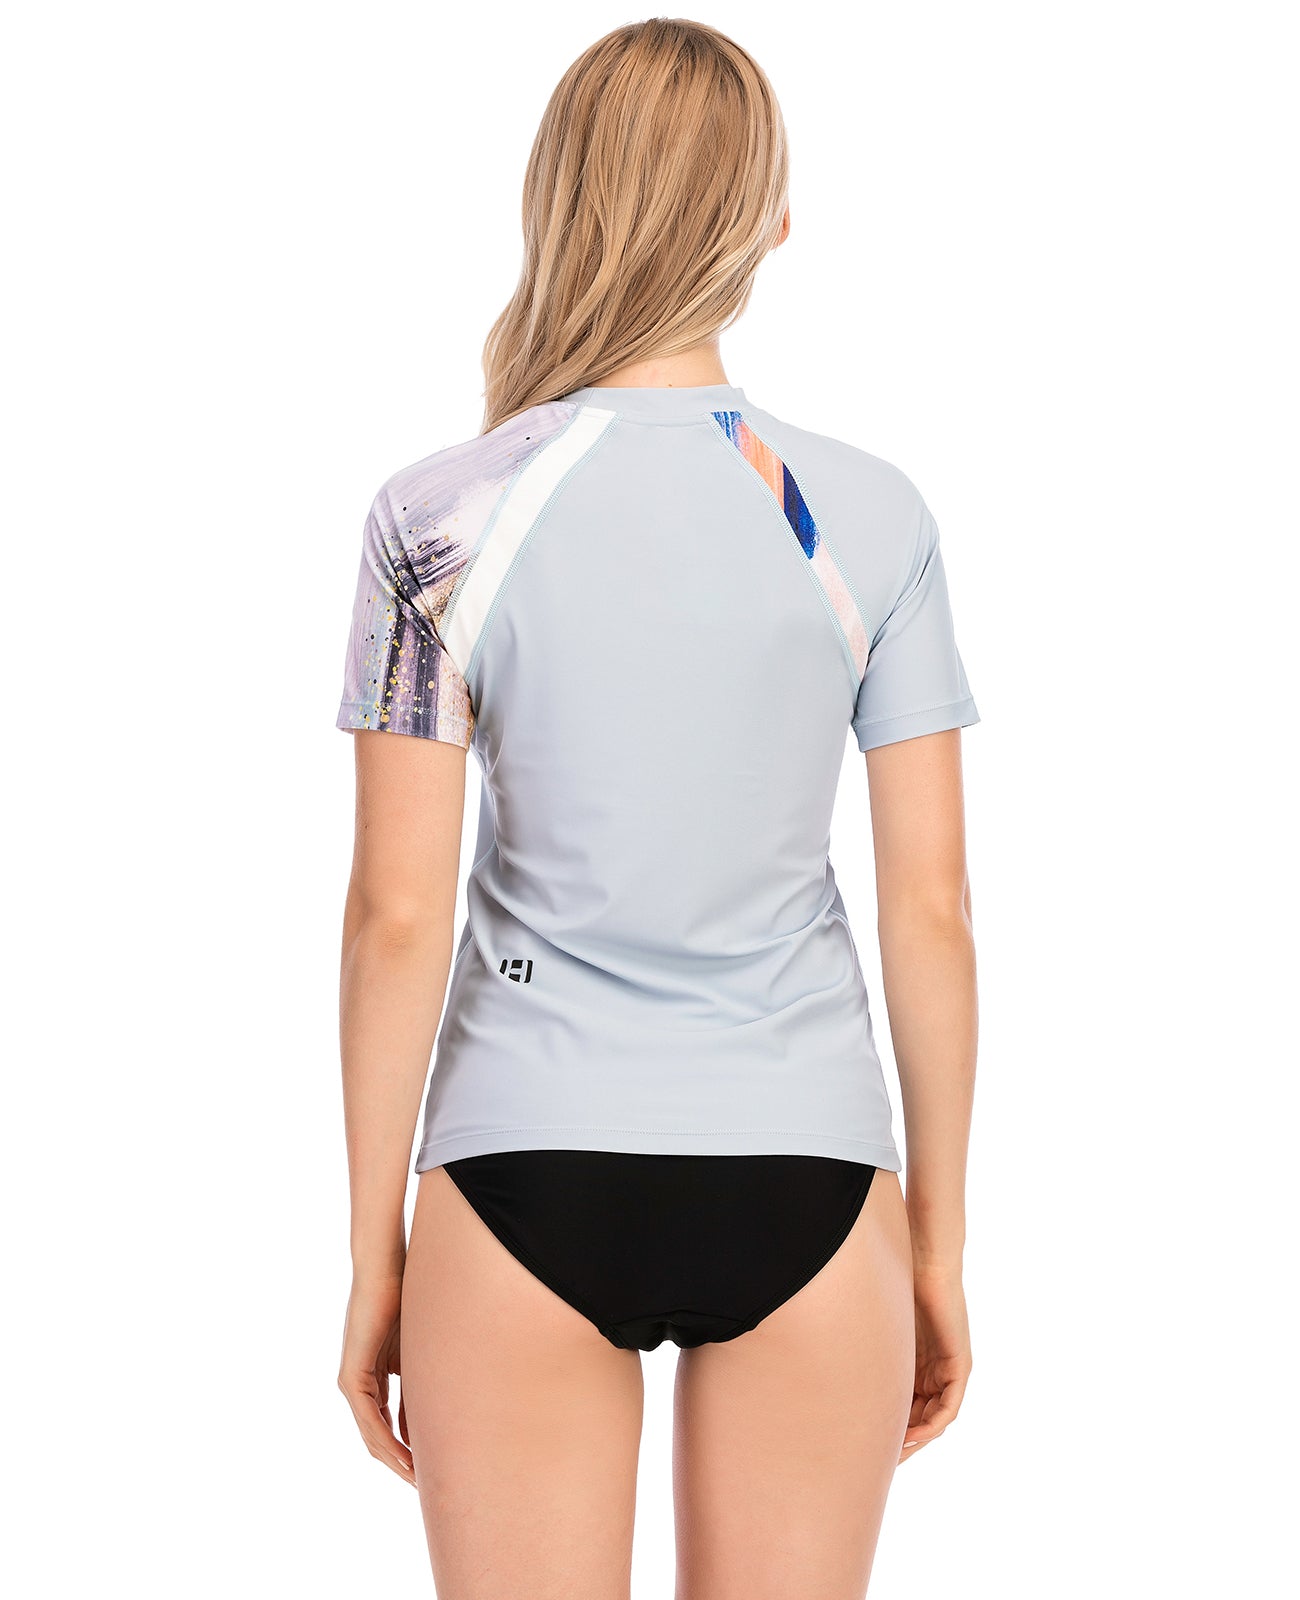 One for All Essential Short-Sleeves Rash Guard - Light Blue